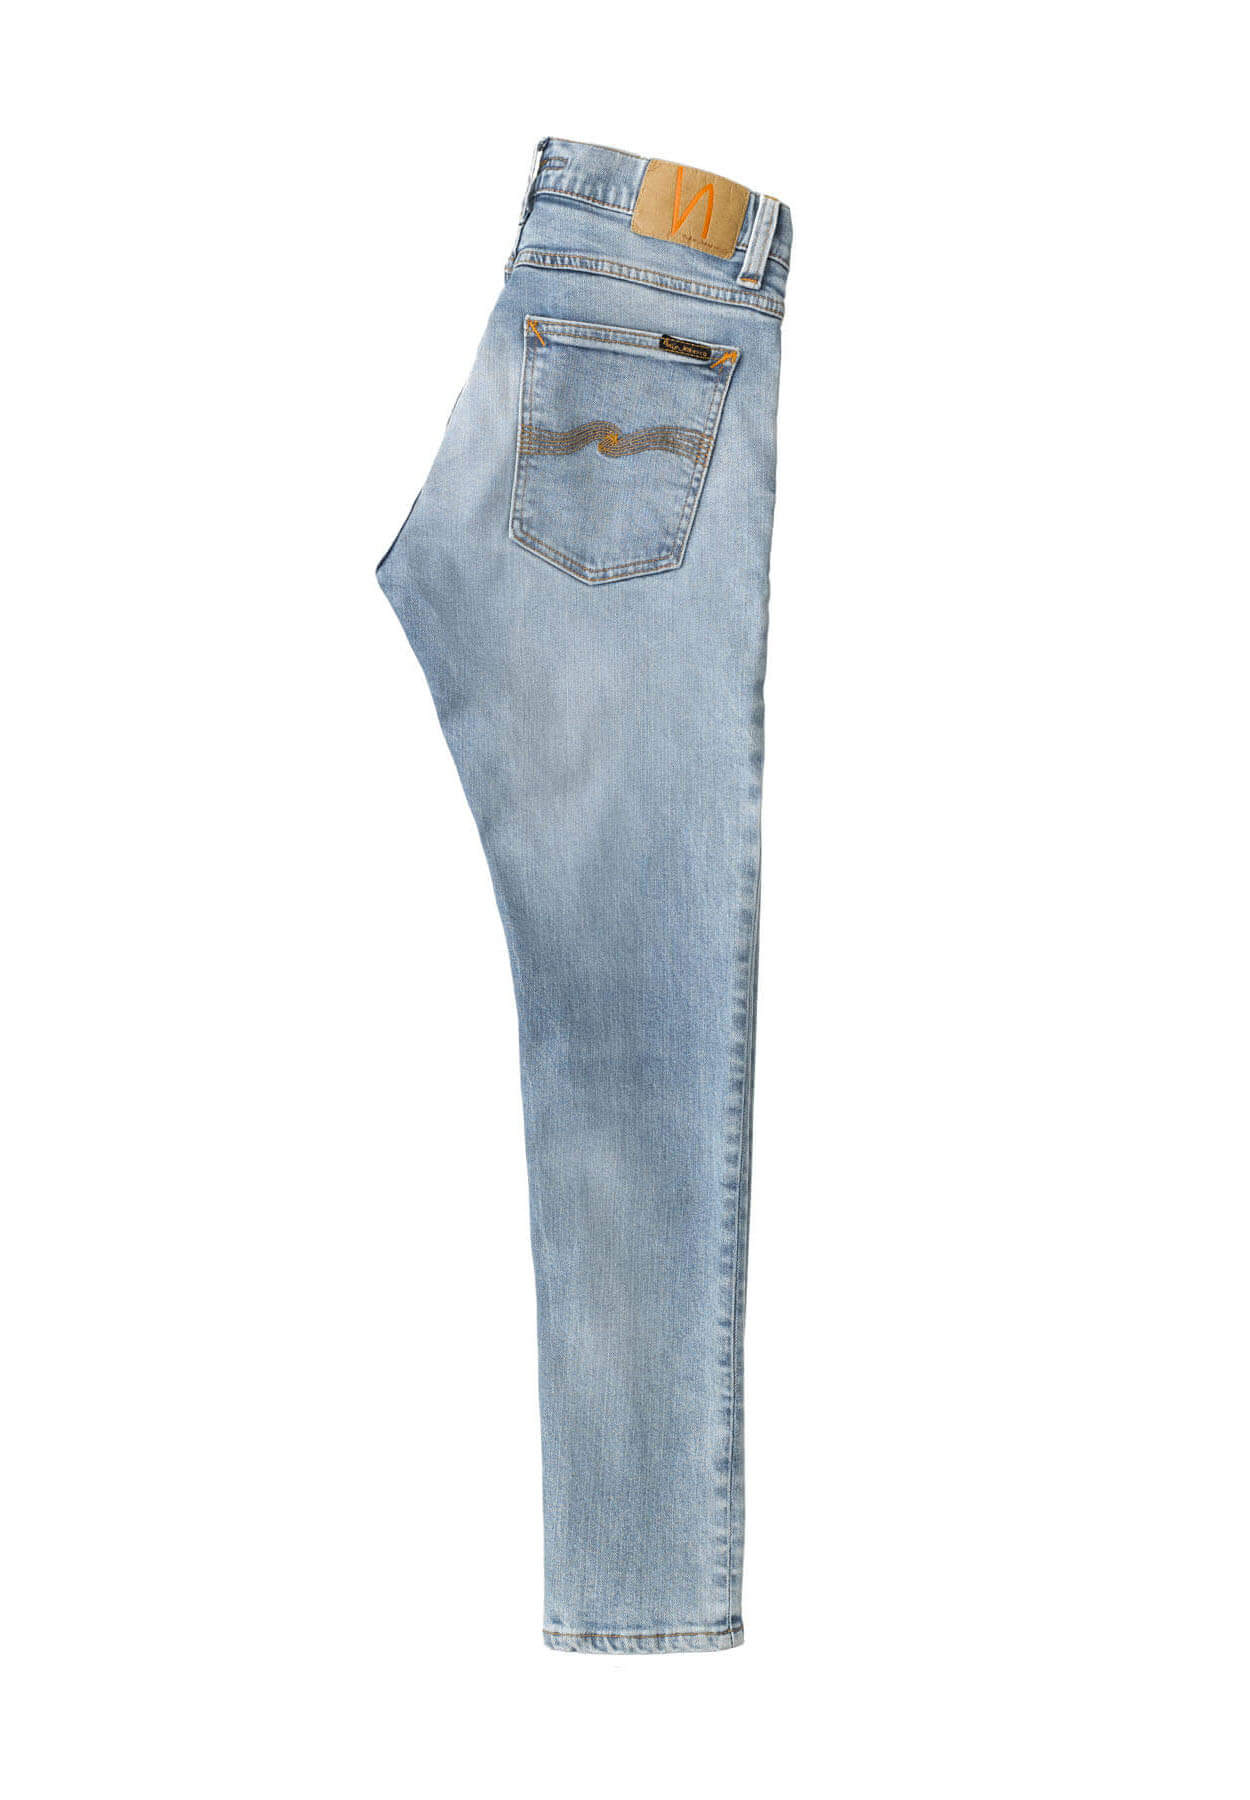 NUDIE JEANS Jeans Tight Terry blue ghost 34/32